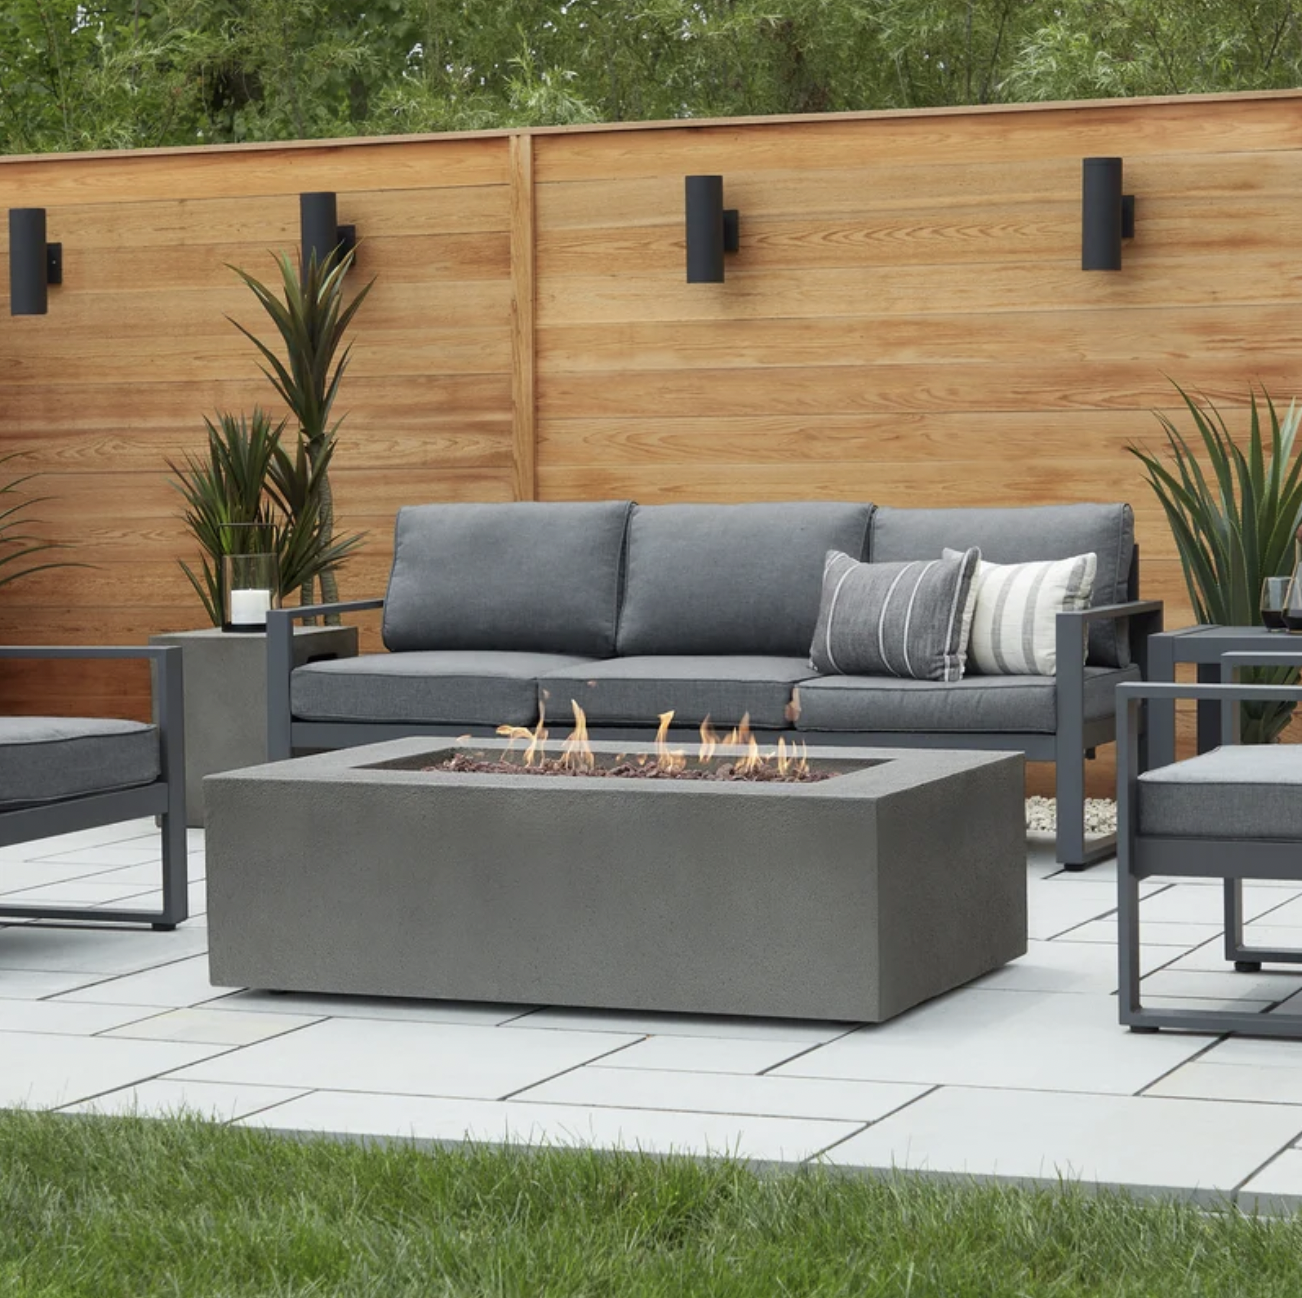 Baltic Concrete Fire Pit  - The concrete finish of this rectangular propane gas fire pit table will blend well with warm, modern landscaping. Spacious at more than four feet long, there’s plenty of room for everyone to gather around—and with a 65000 BTU output, plenty of heat as well. SHOP NOW >